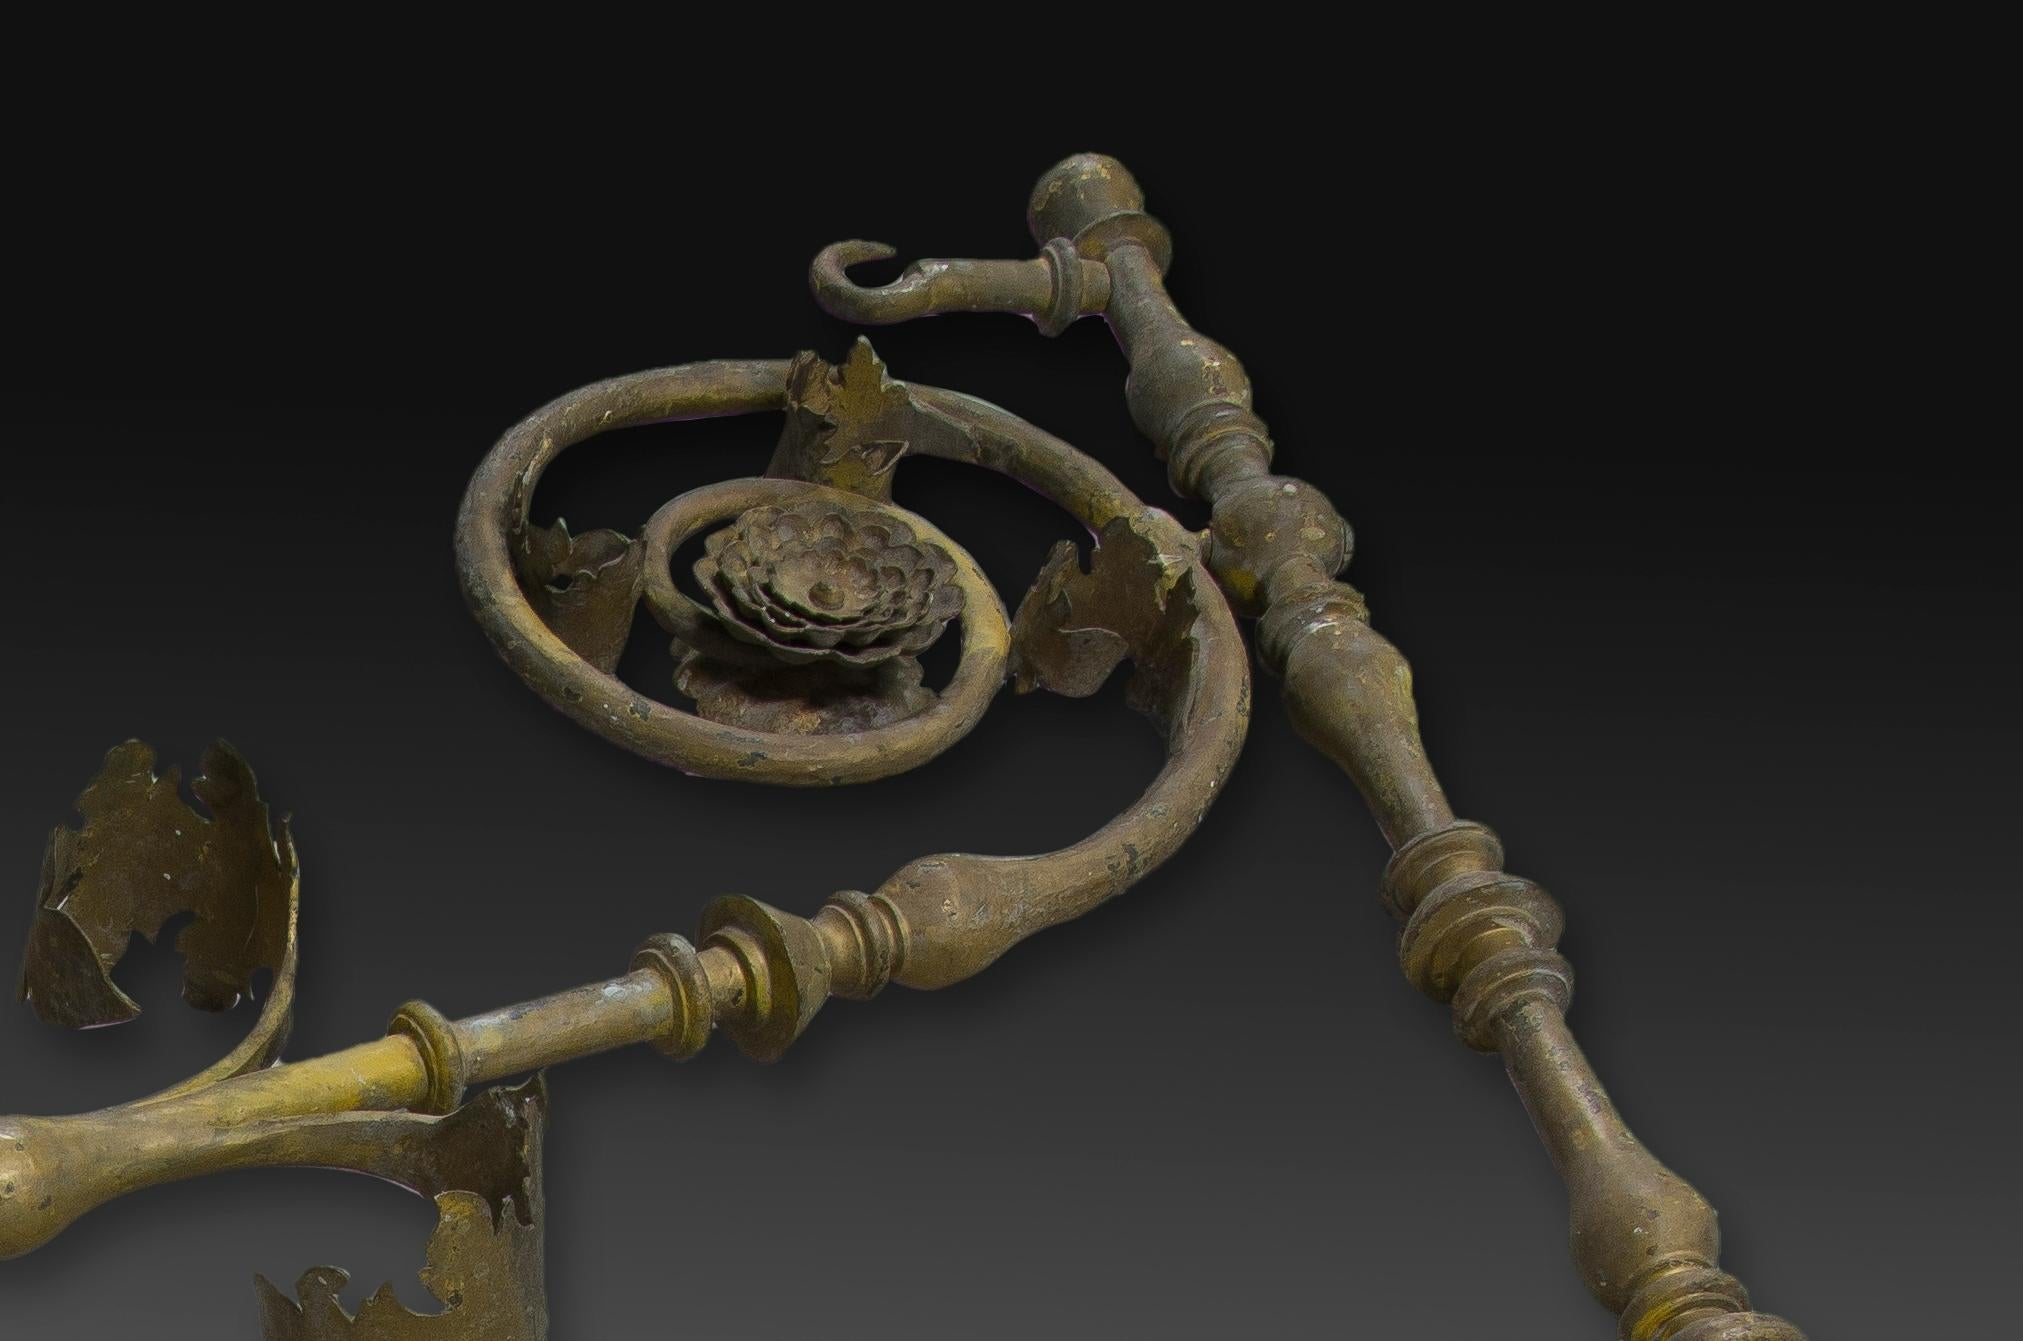 European Set of Two wrought Iron Supports, 16th-17th Century